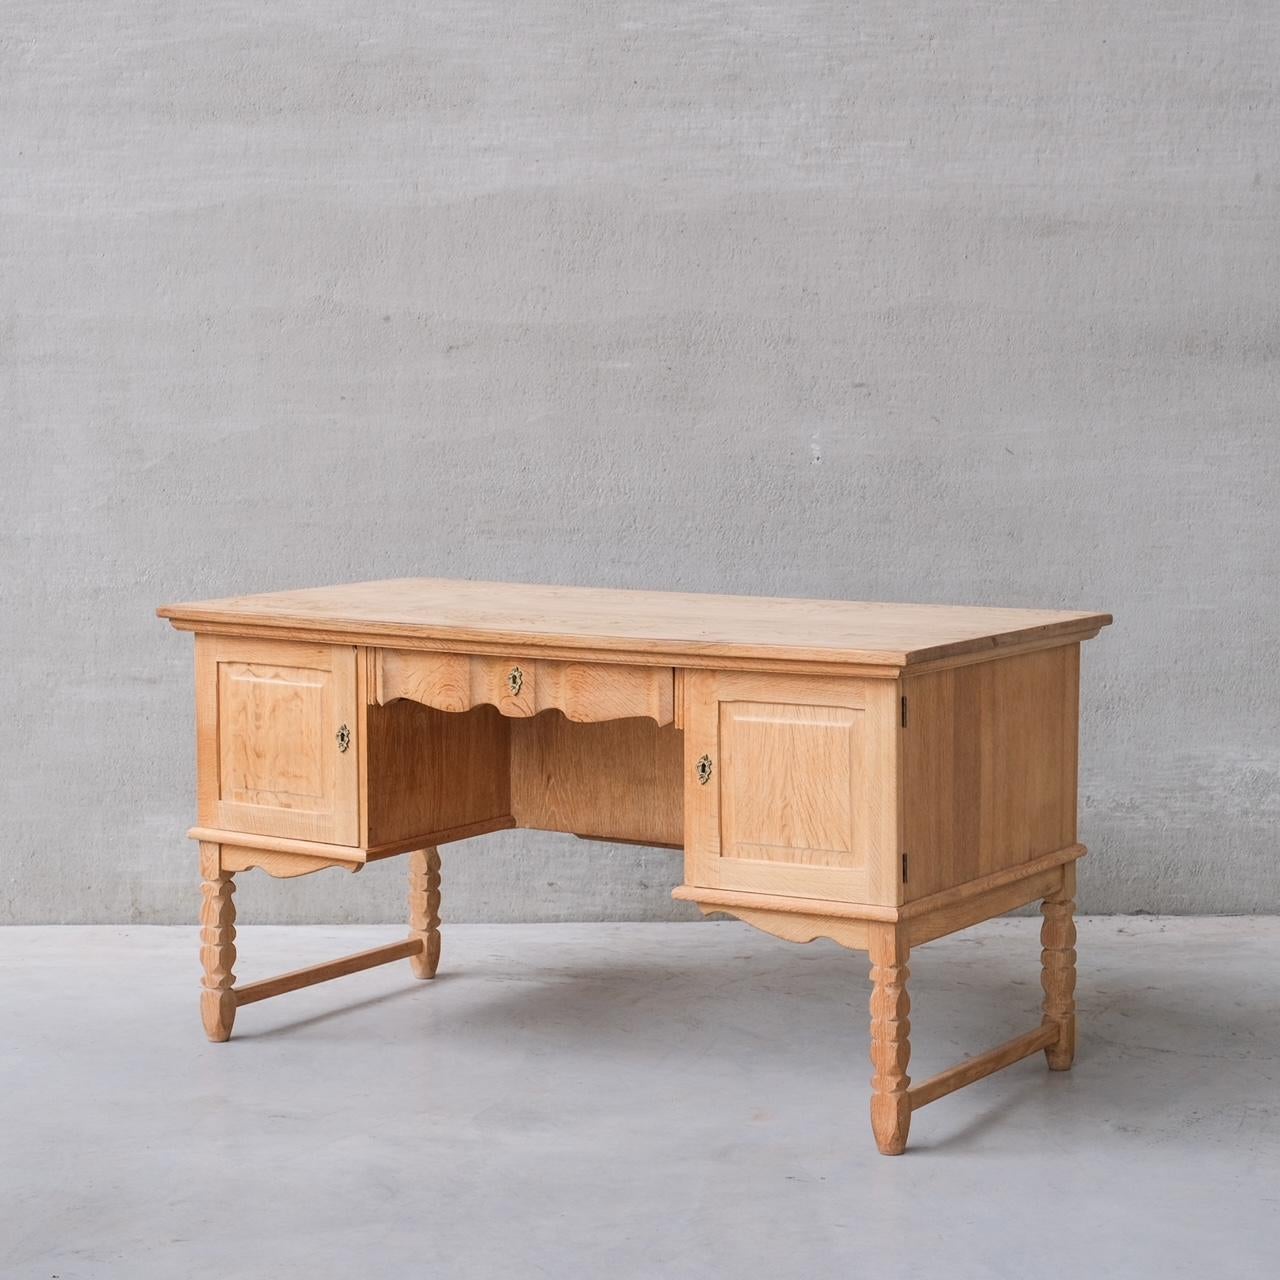 A good looking simple desk, in oak, with reverse book case shelves for displaying books or curios.

Denmark, c1960s.

Attributed to Henning Kjaernulf.

Good vintage condition. Some scuffs and patina commensurate with age.

Internal ref: